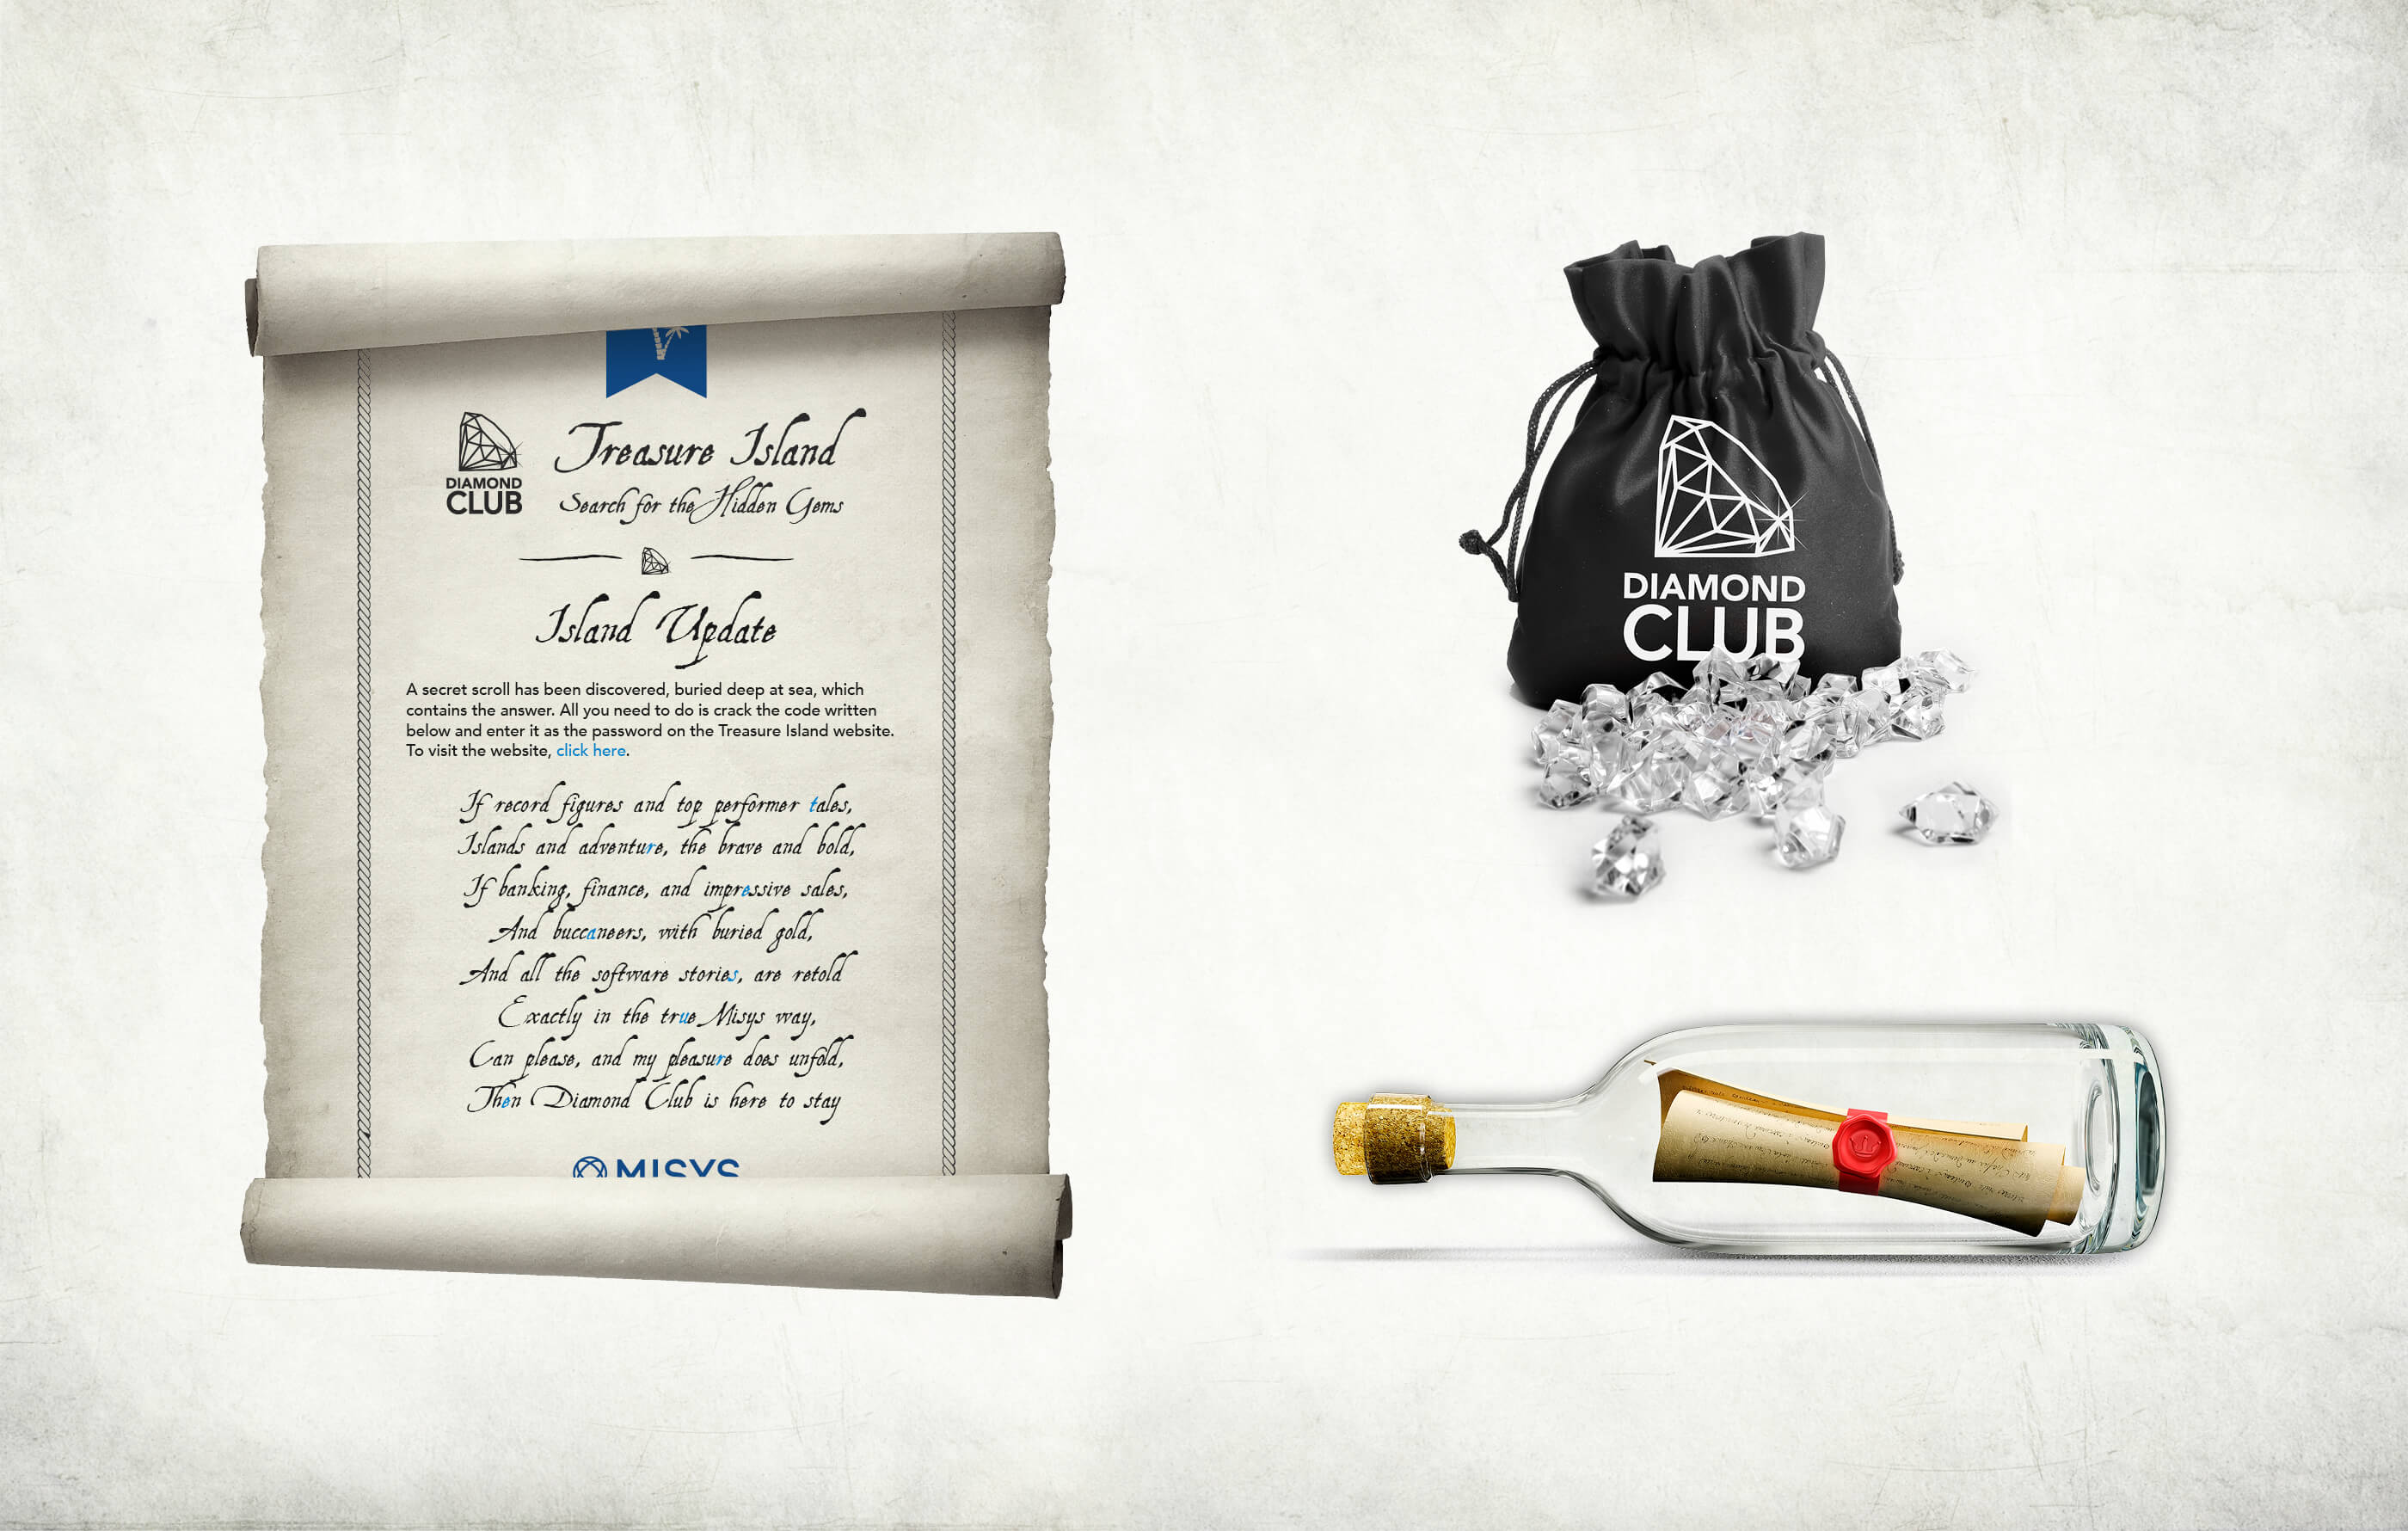 Three teaser items from the incentive on a vintage, weathered background including scroll-shaped emailer, bag of diamonds and message in a bottle